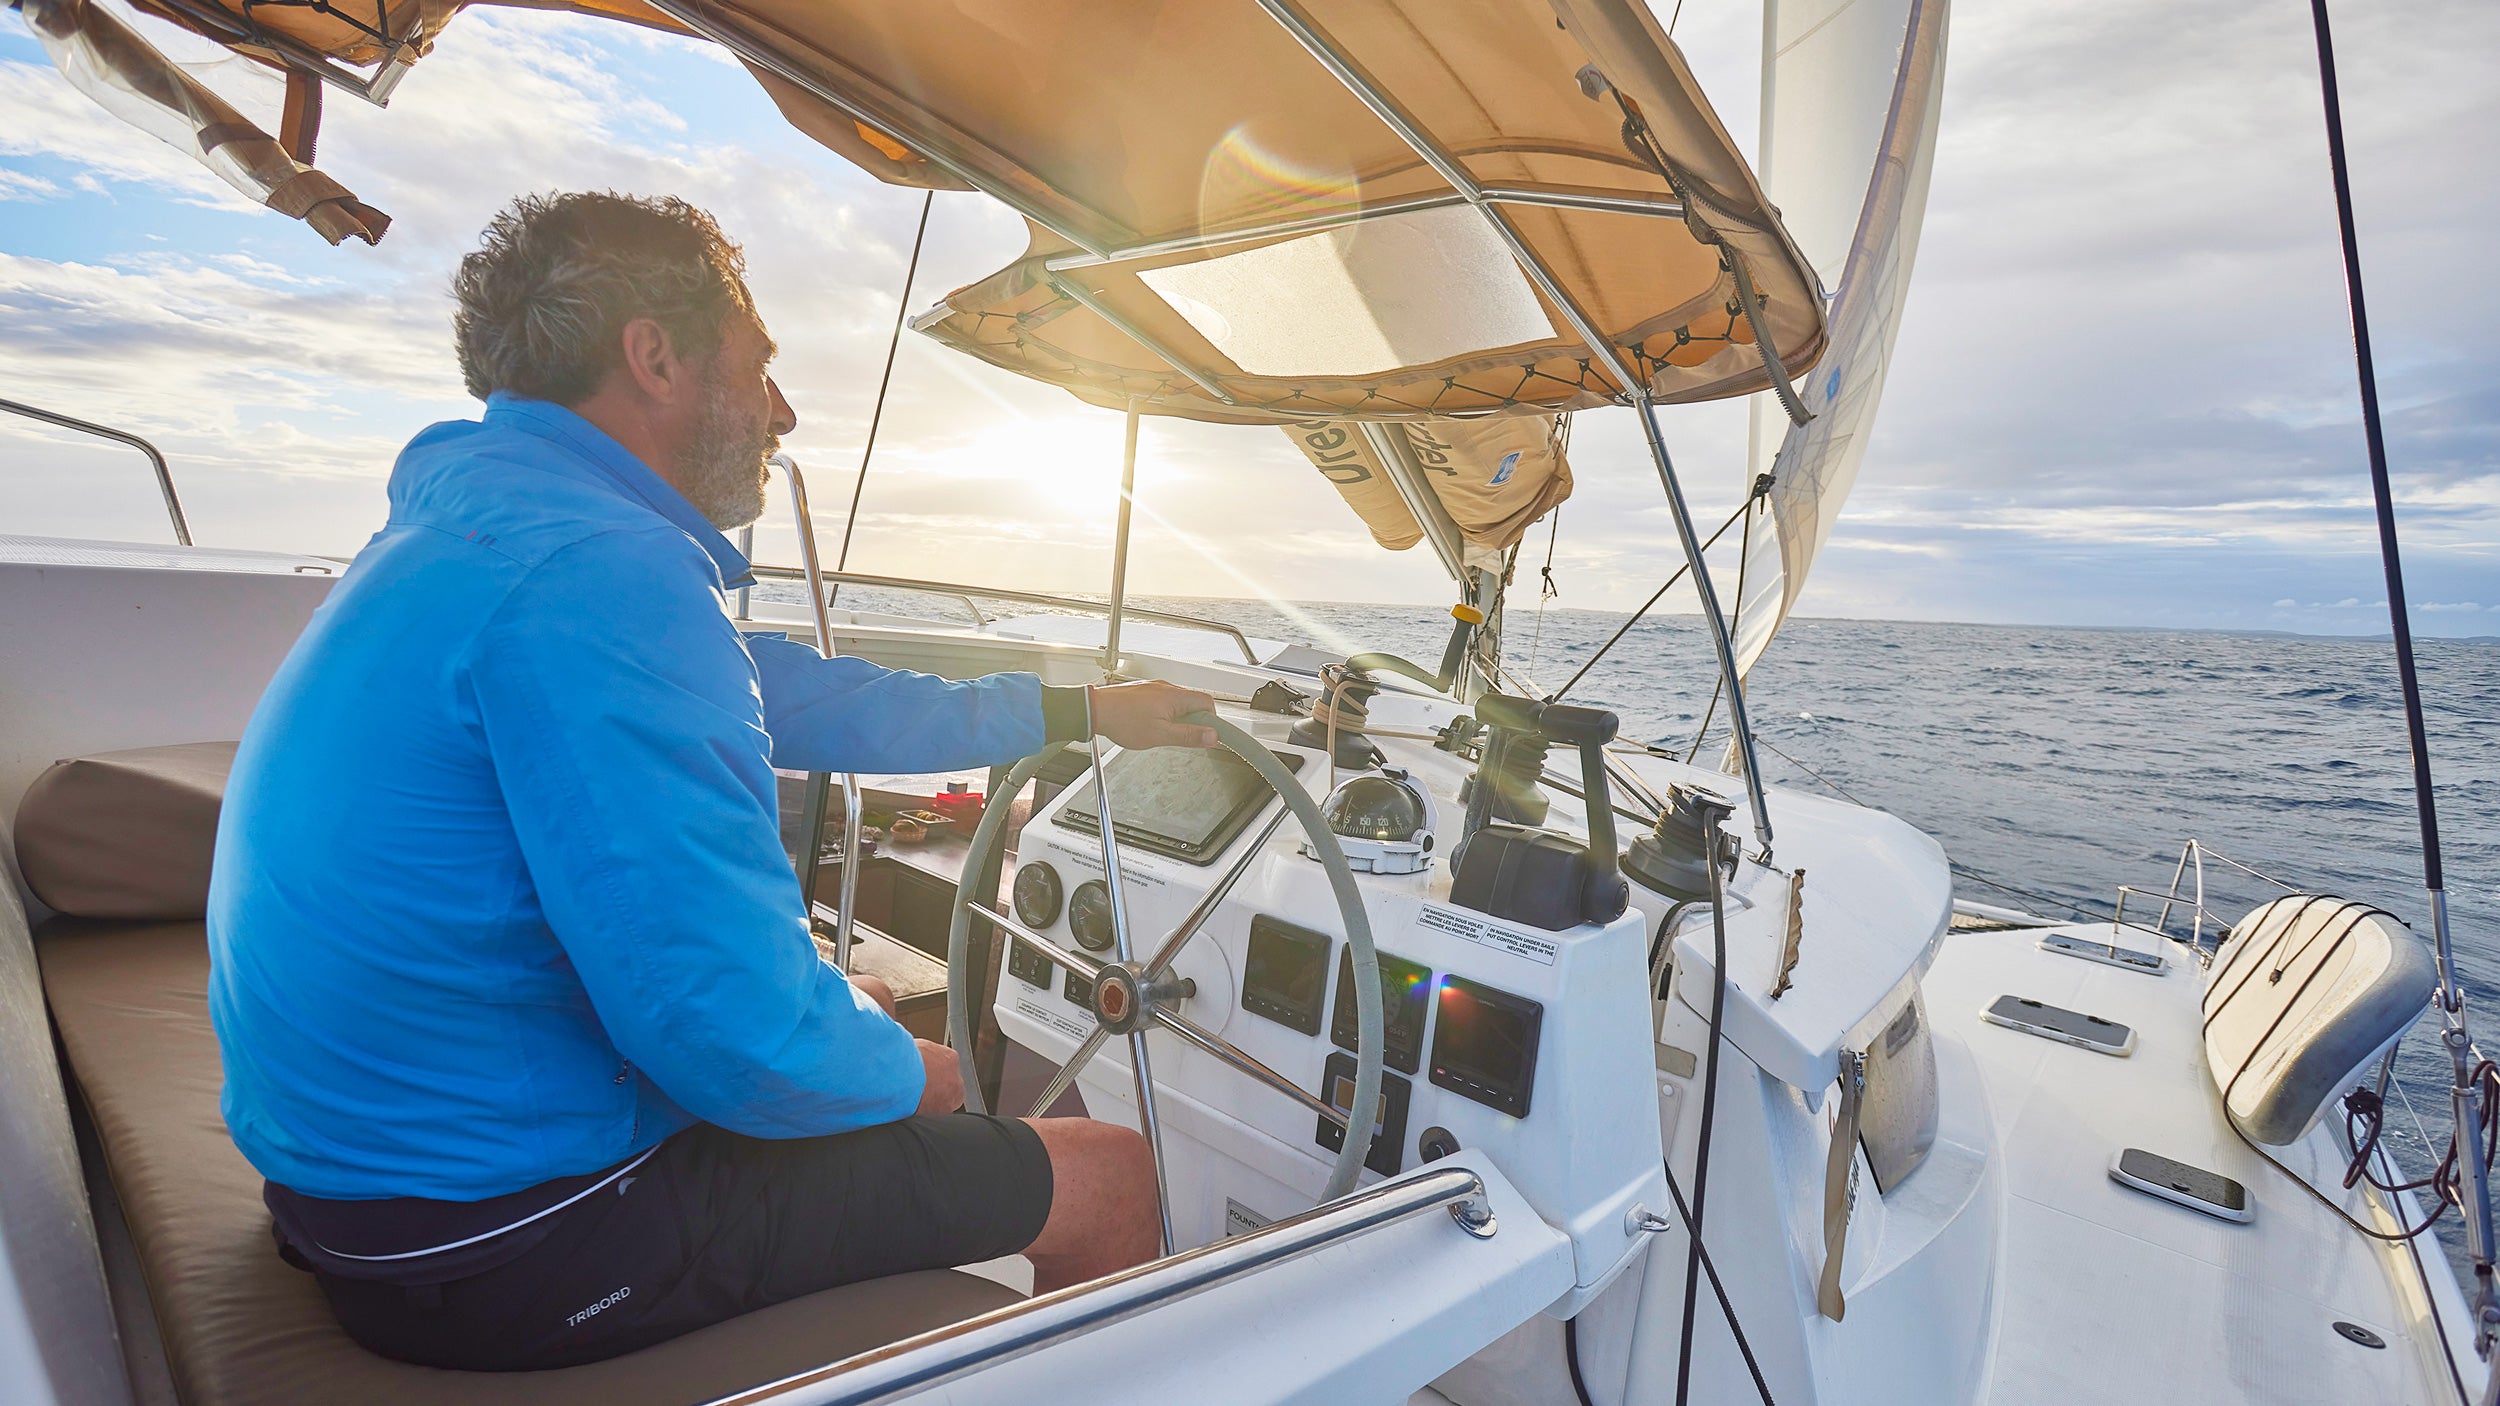 Learn to sail: Everything you need to know